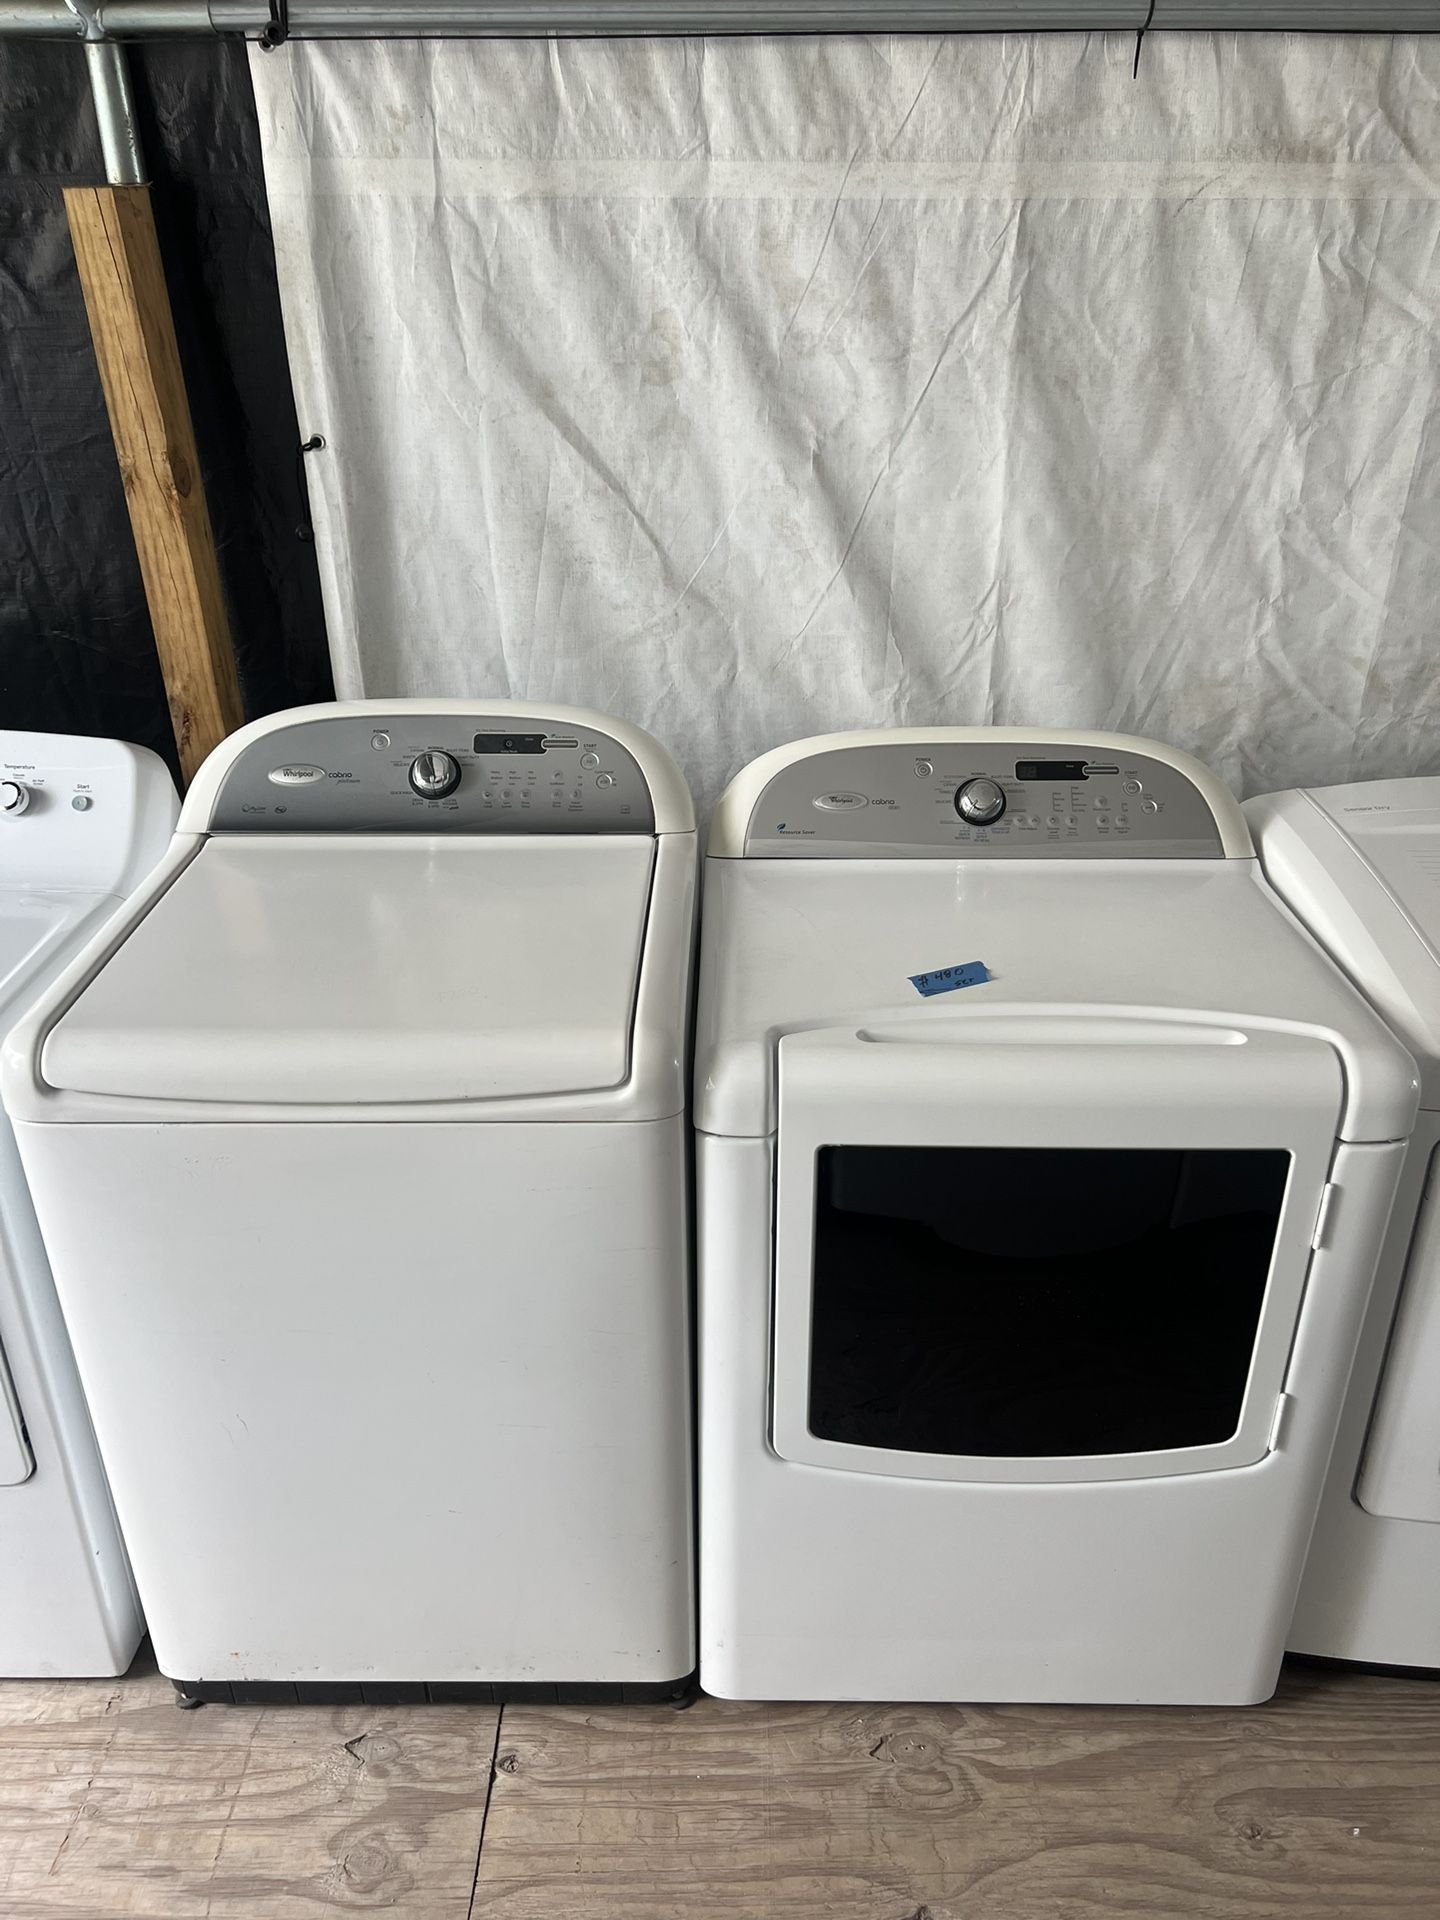 Whirlpool Washer&dryer Large Capacity Set    60 day warranty/ Located at:📍5415 Carmack Rd Tampa Fl 33610📍